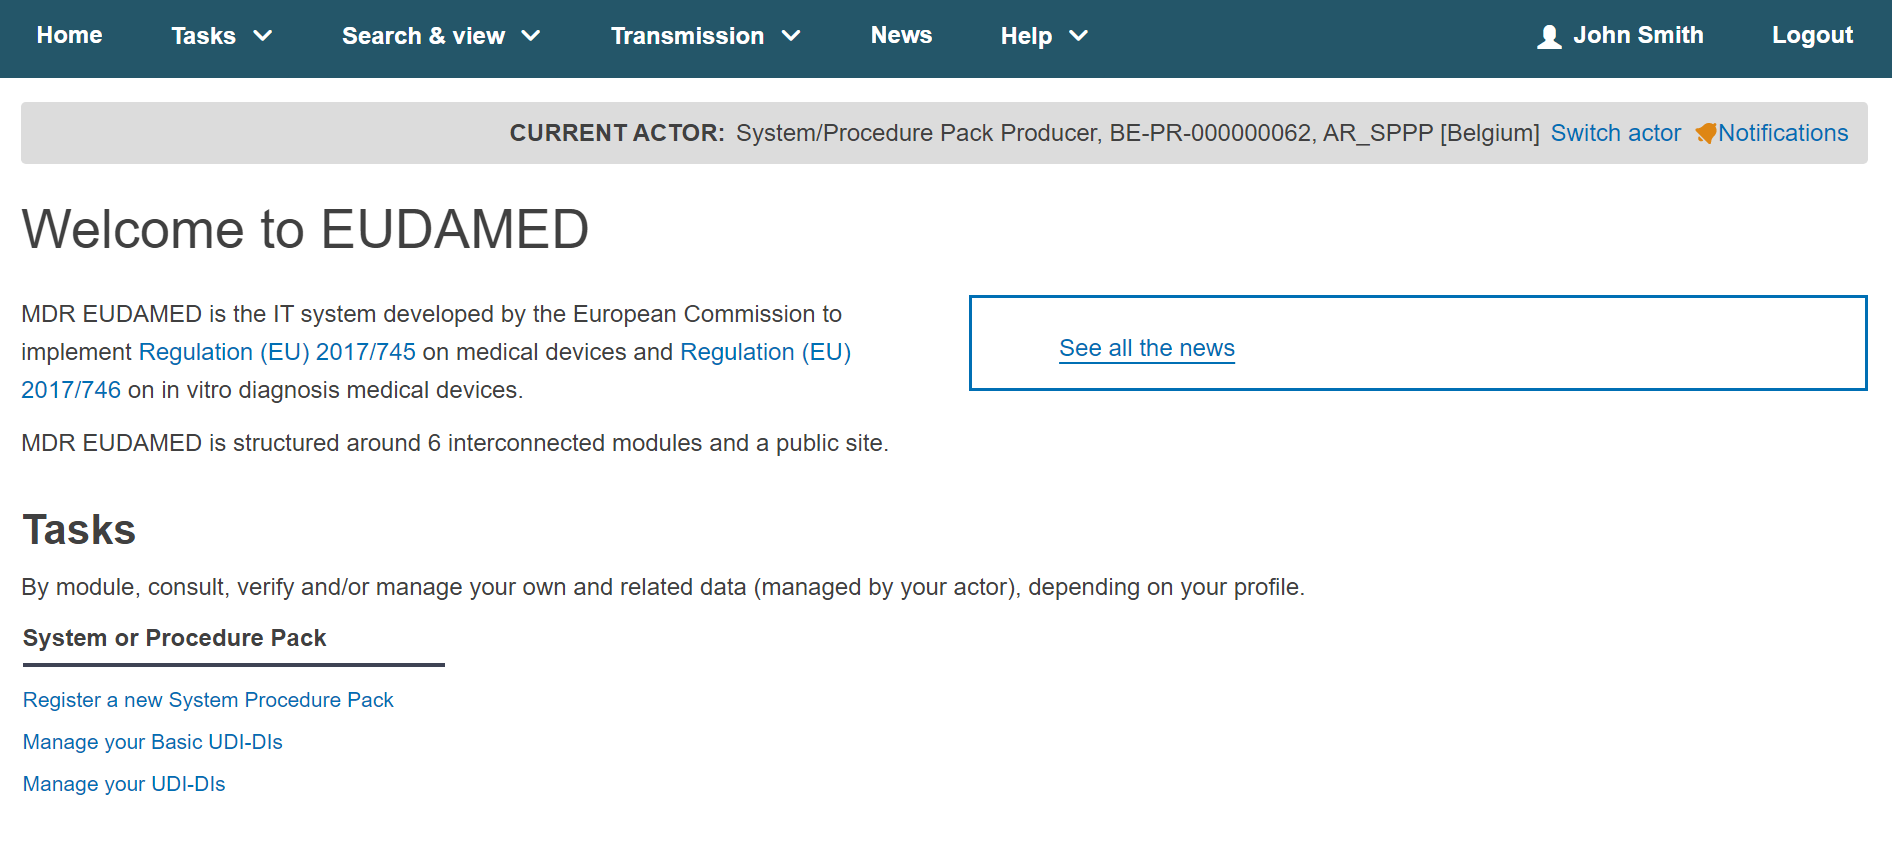 EUDAMED register a new system procedure pack link in the dashboard